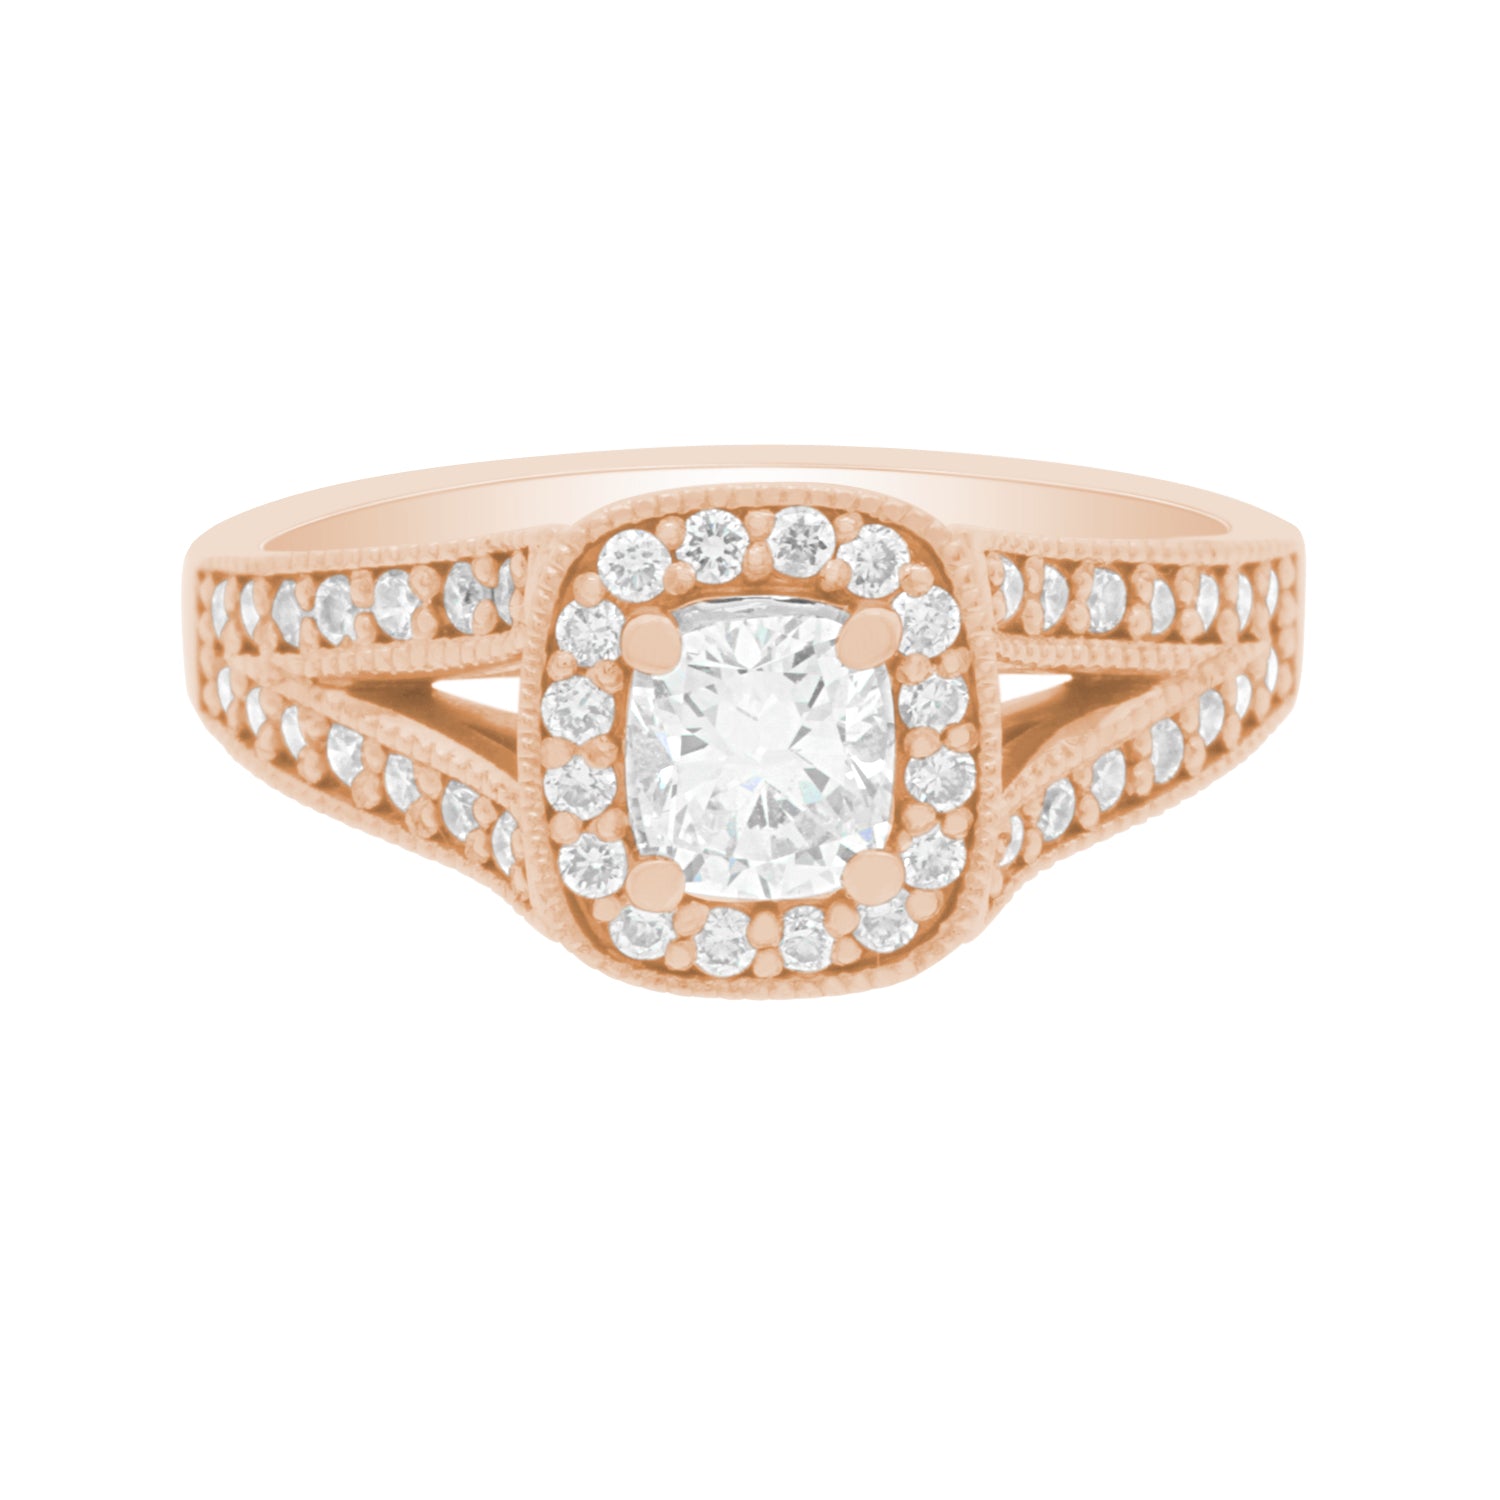 Cushion Halo Diamond Ring in rose gold and laying flat